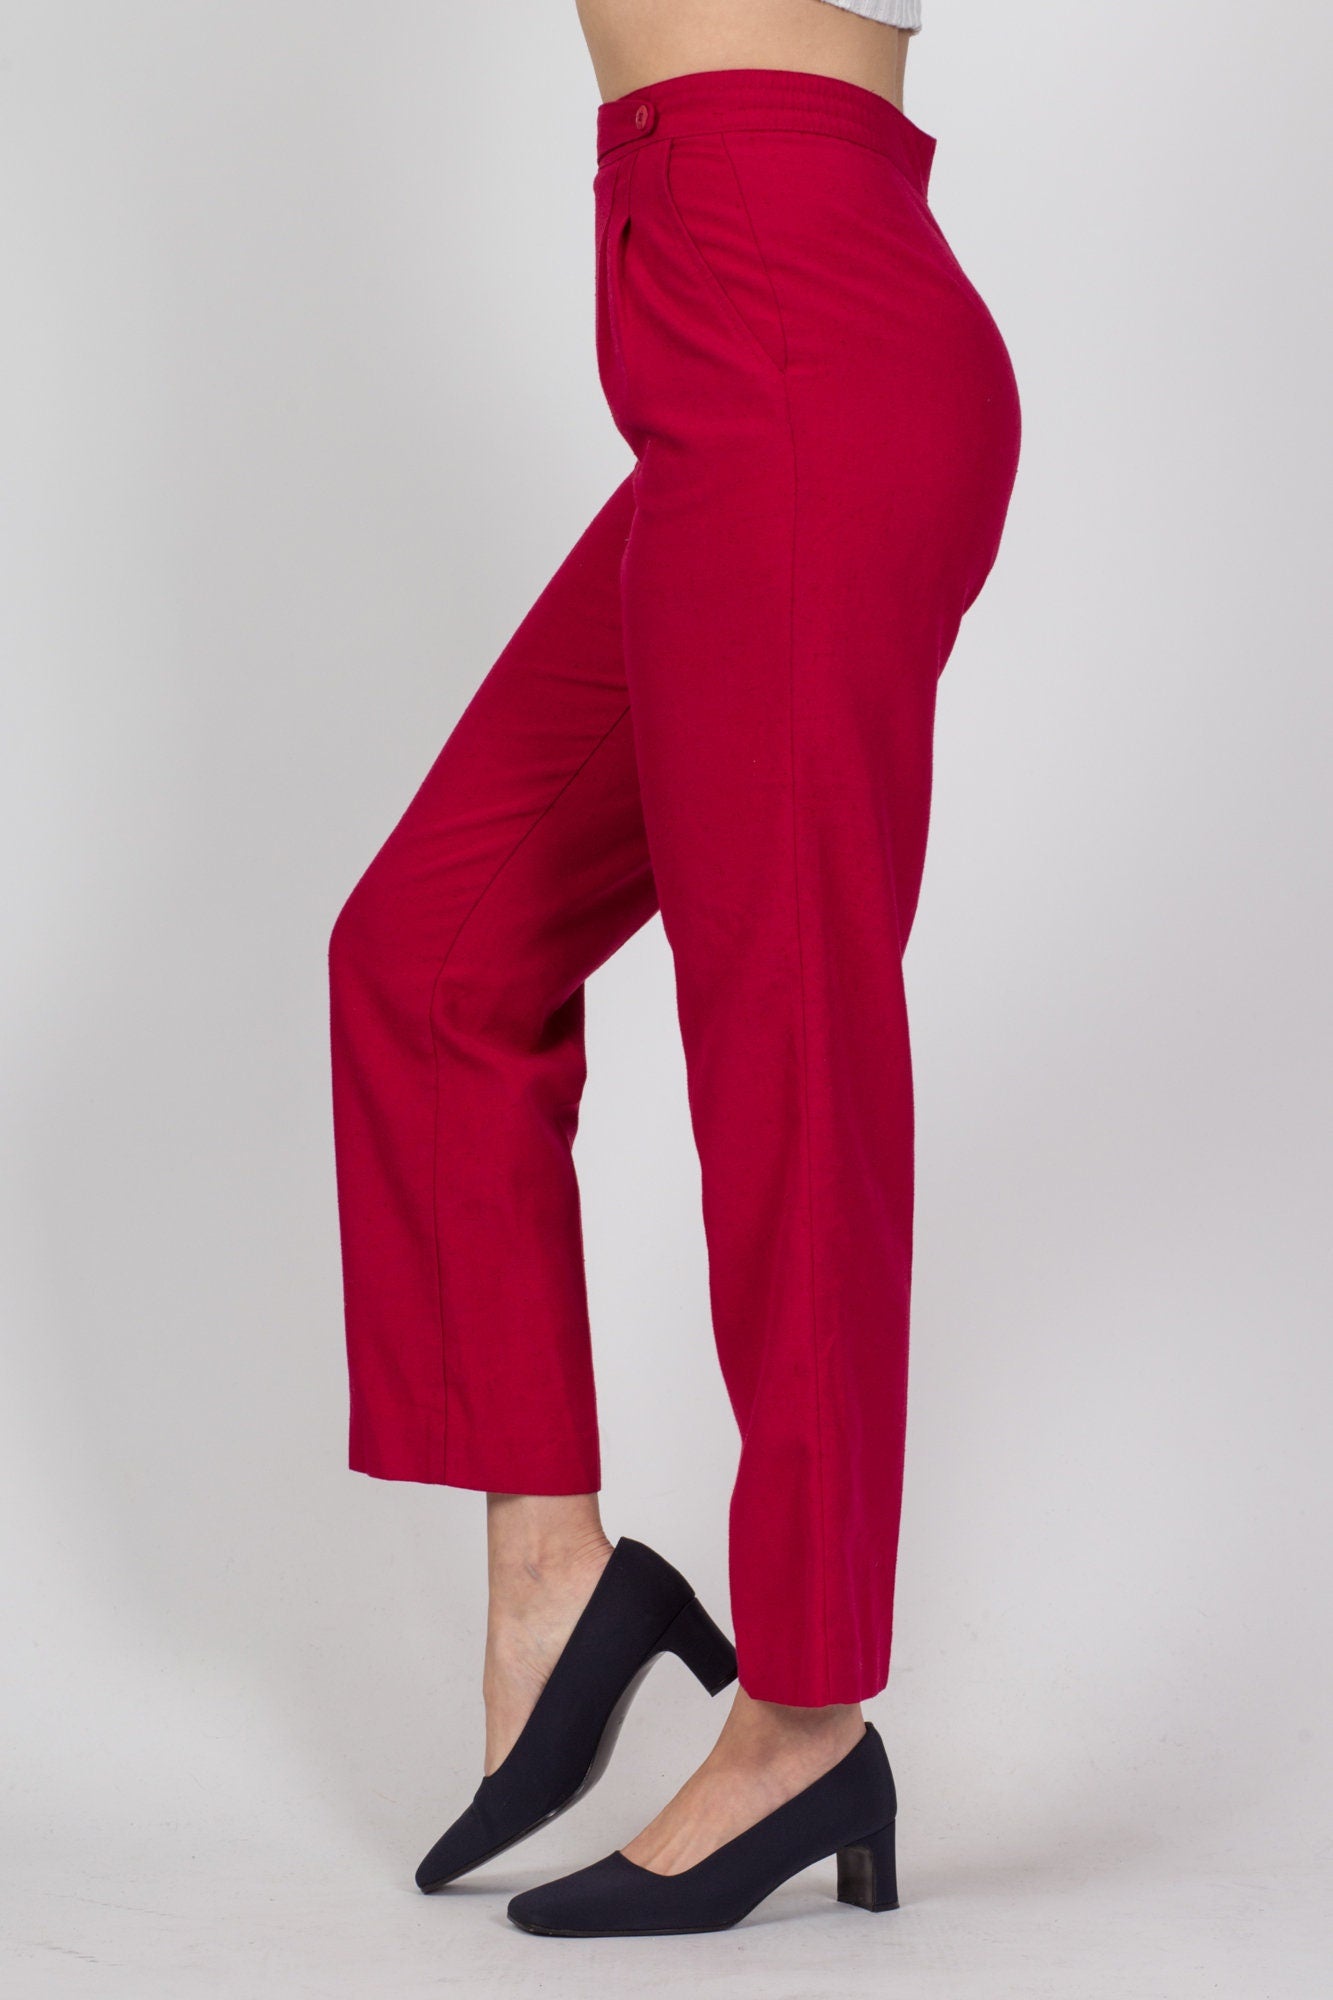 Vintage High Waist Raspberry Pink Trousers - Small to Medium 